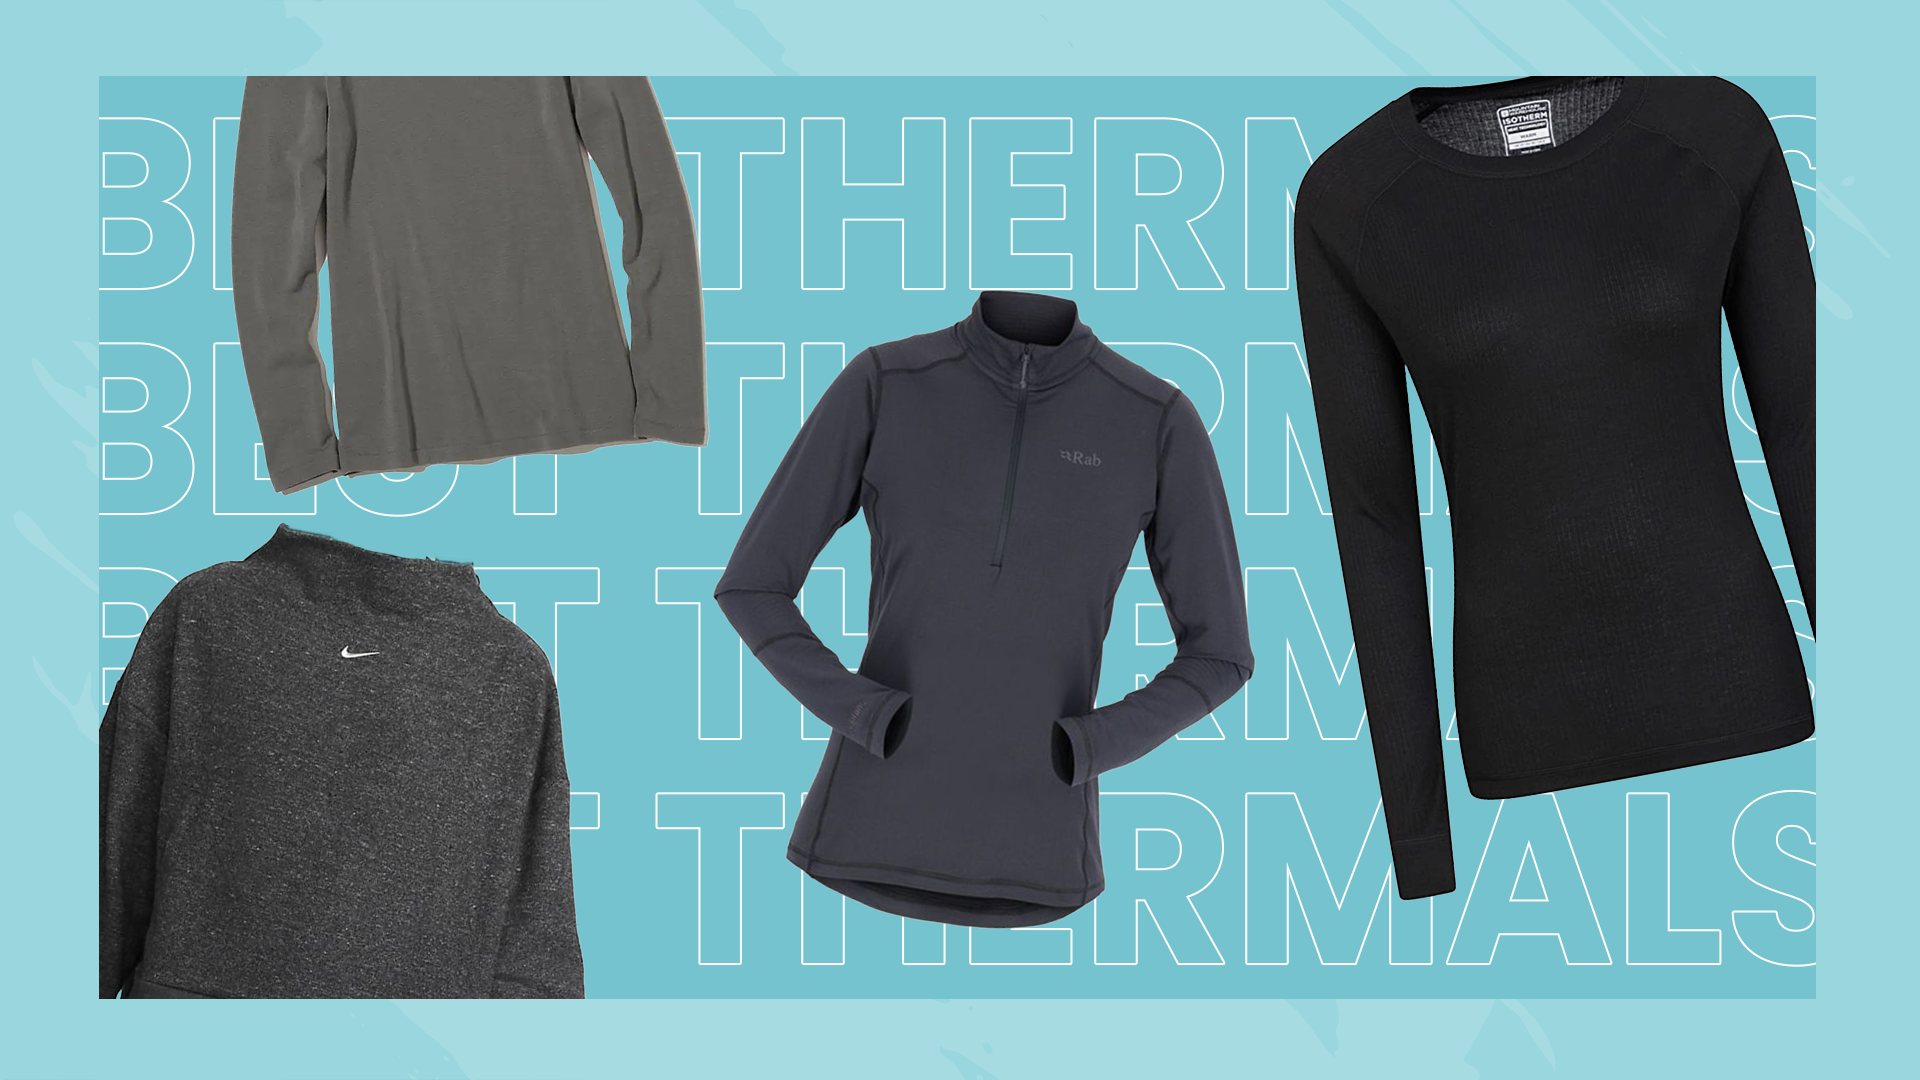 Women's Thermal Tops - Roots